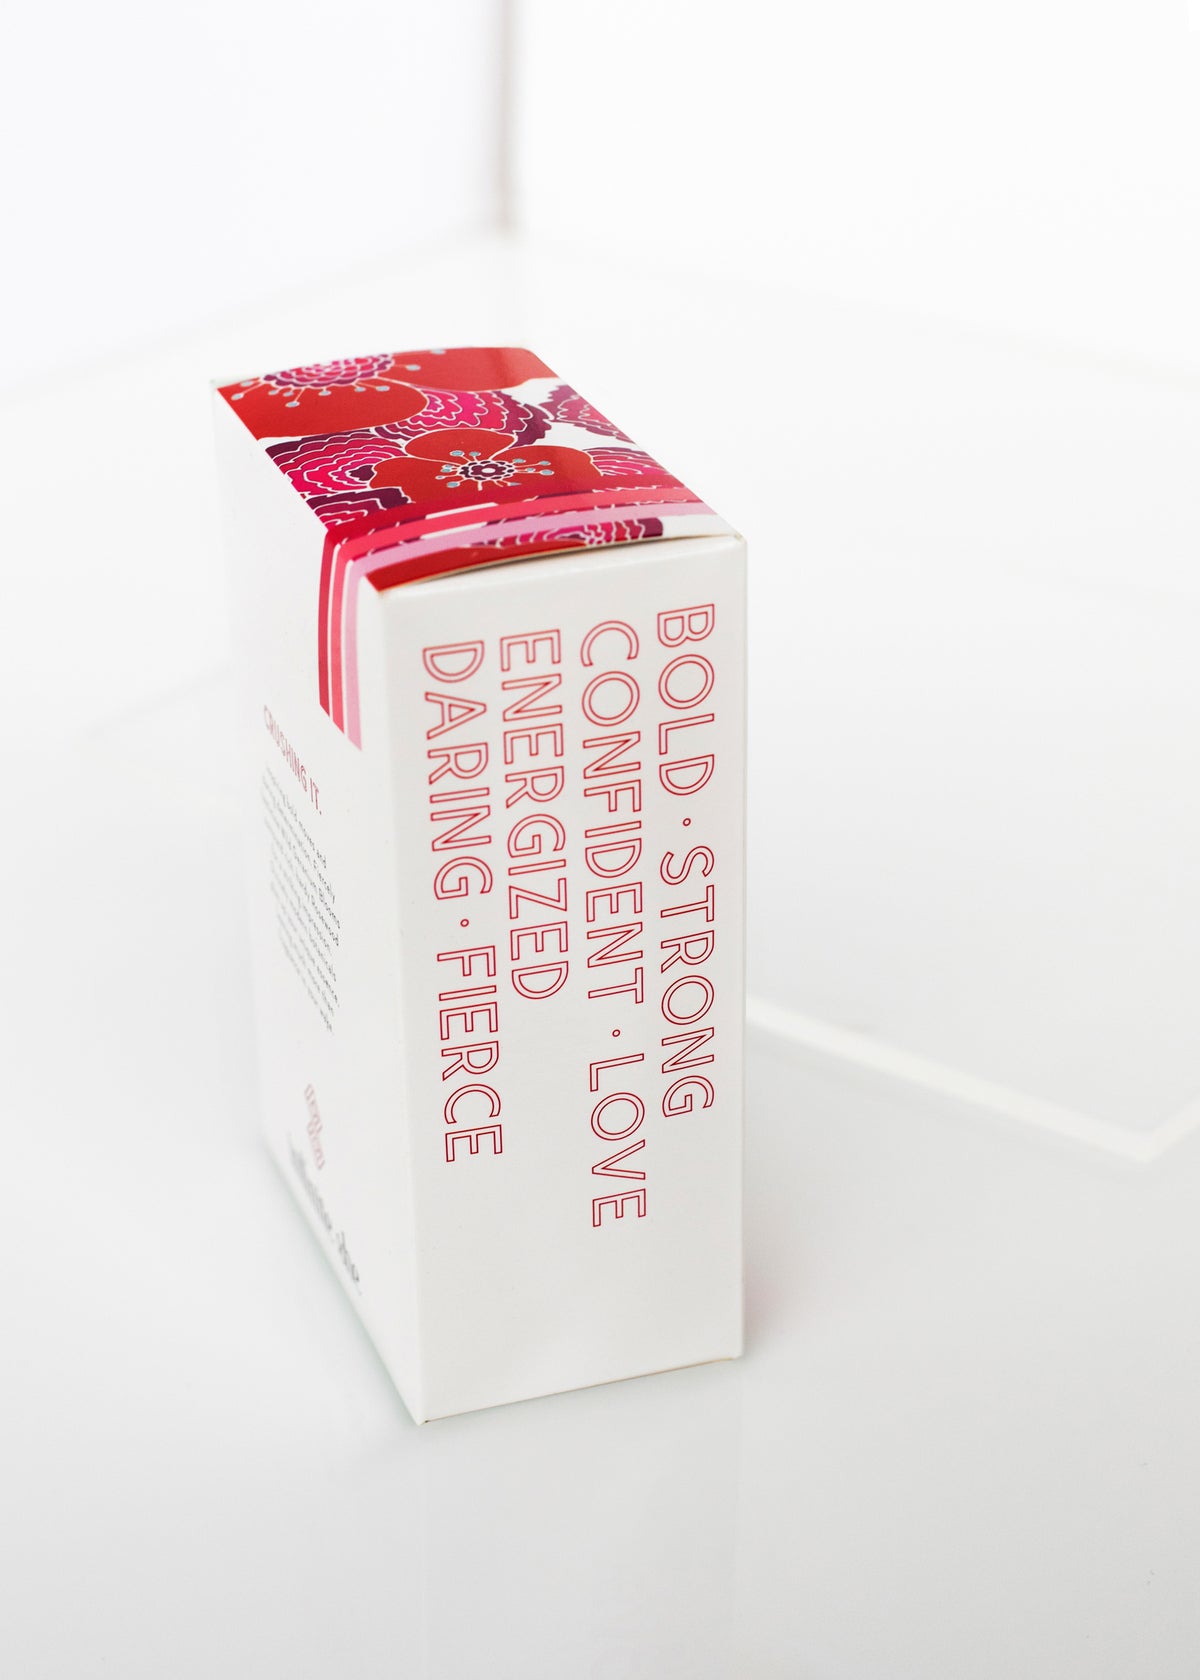 A white Margot Elena product box on a glossy surface with the words "bold, confident, strong, energized, love, daring, fierce" and "Vegan Fragrance" printed in black and red fonts.